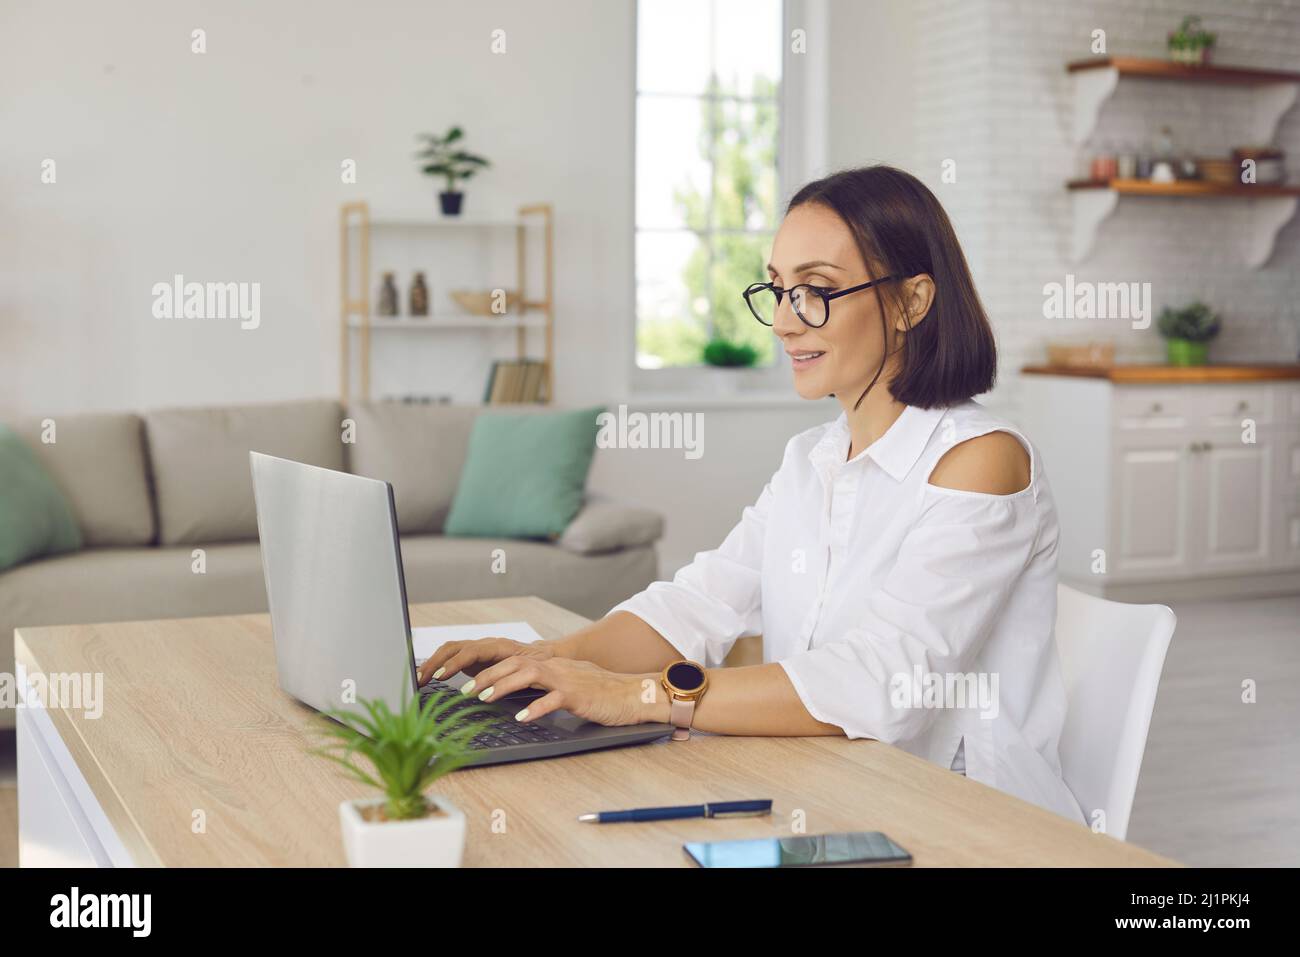 Woman work on laptop at home office online Stock Photo